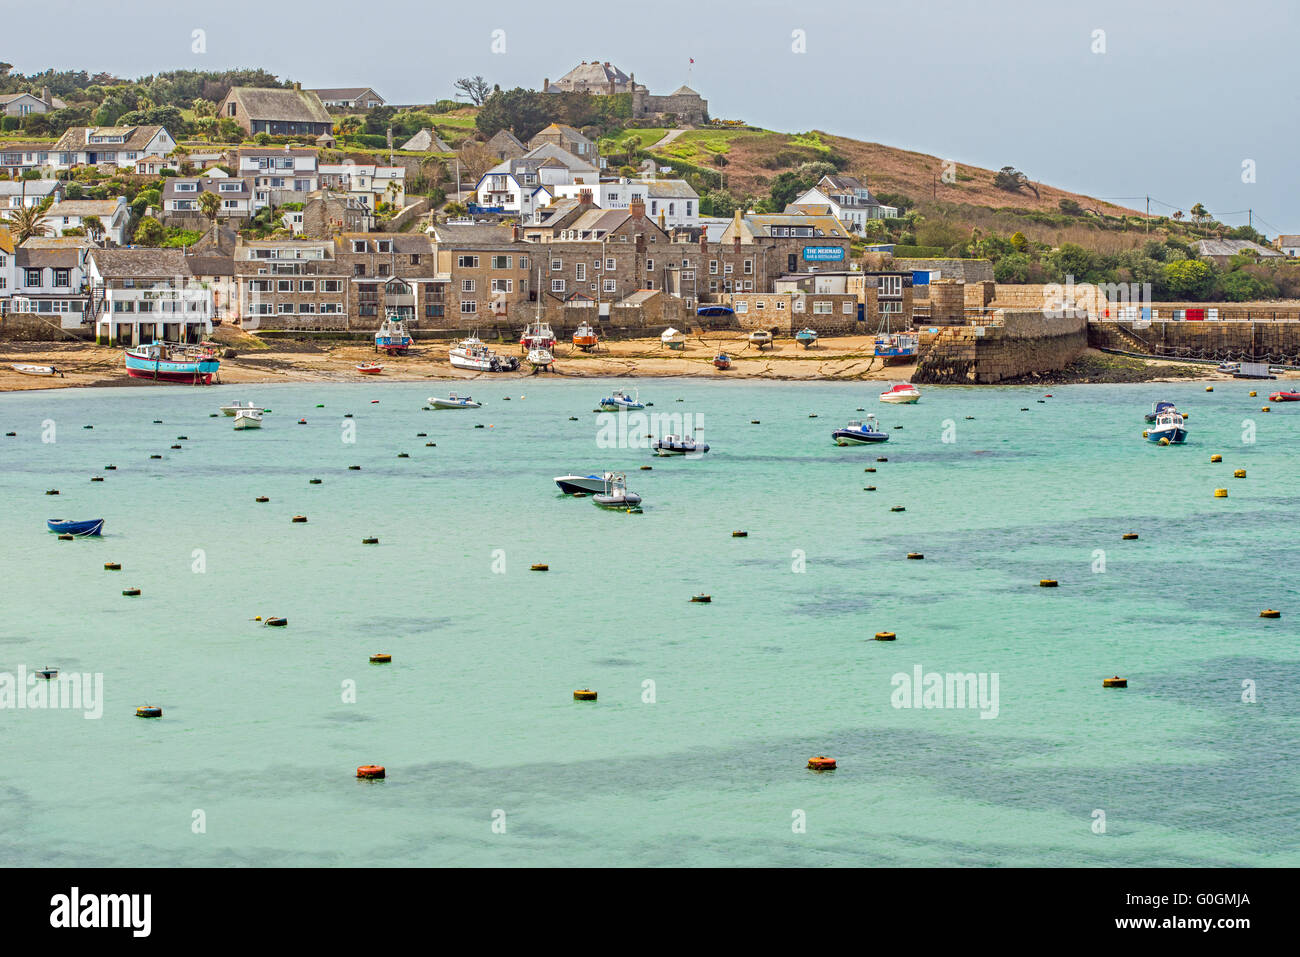 Hugh Town on St Marys on the Isles of Scilly showing the bay and boat moorings Stock Photo